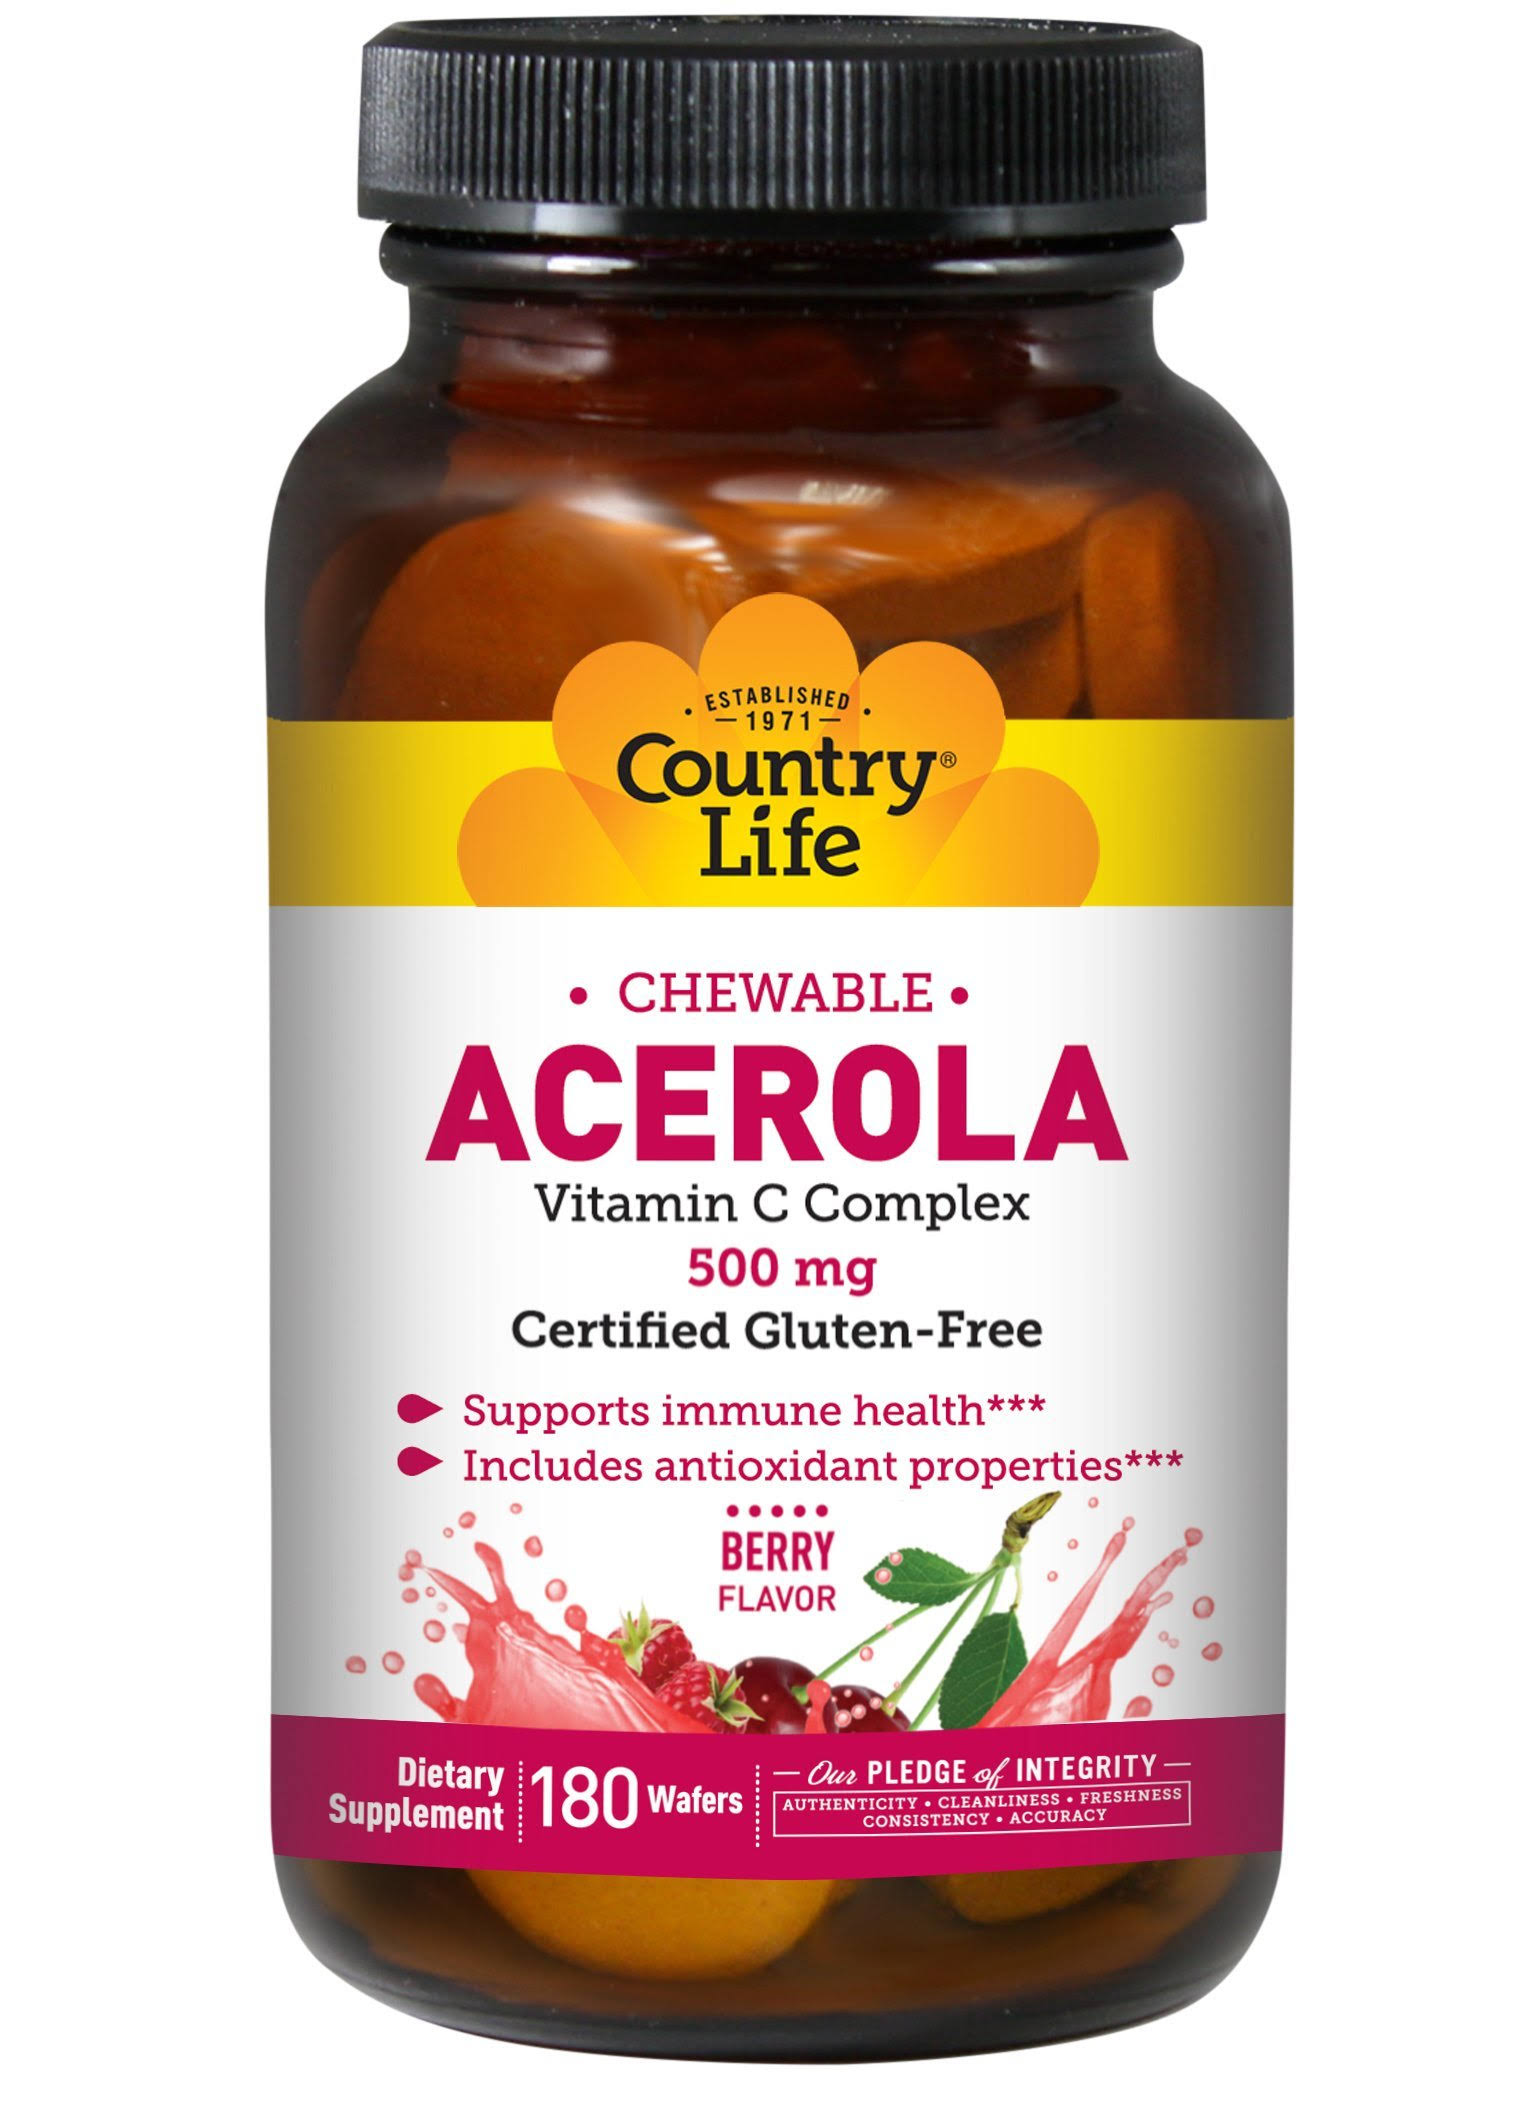 Country Life Acerola Vitamin C Complex Supplement - 500mg, 180 Wafers